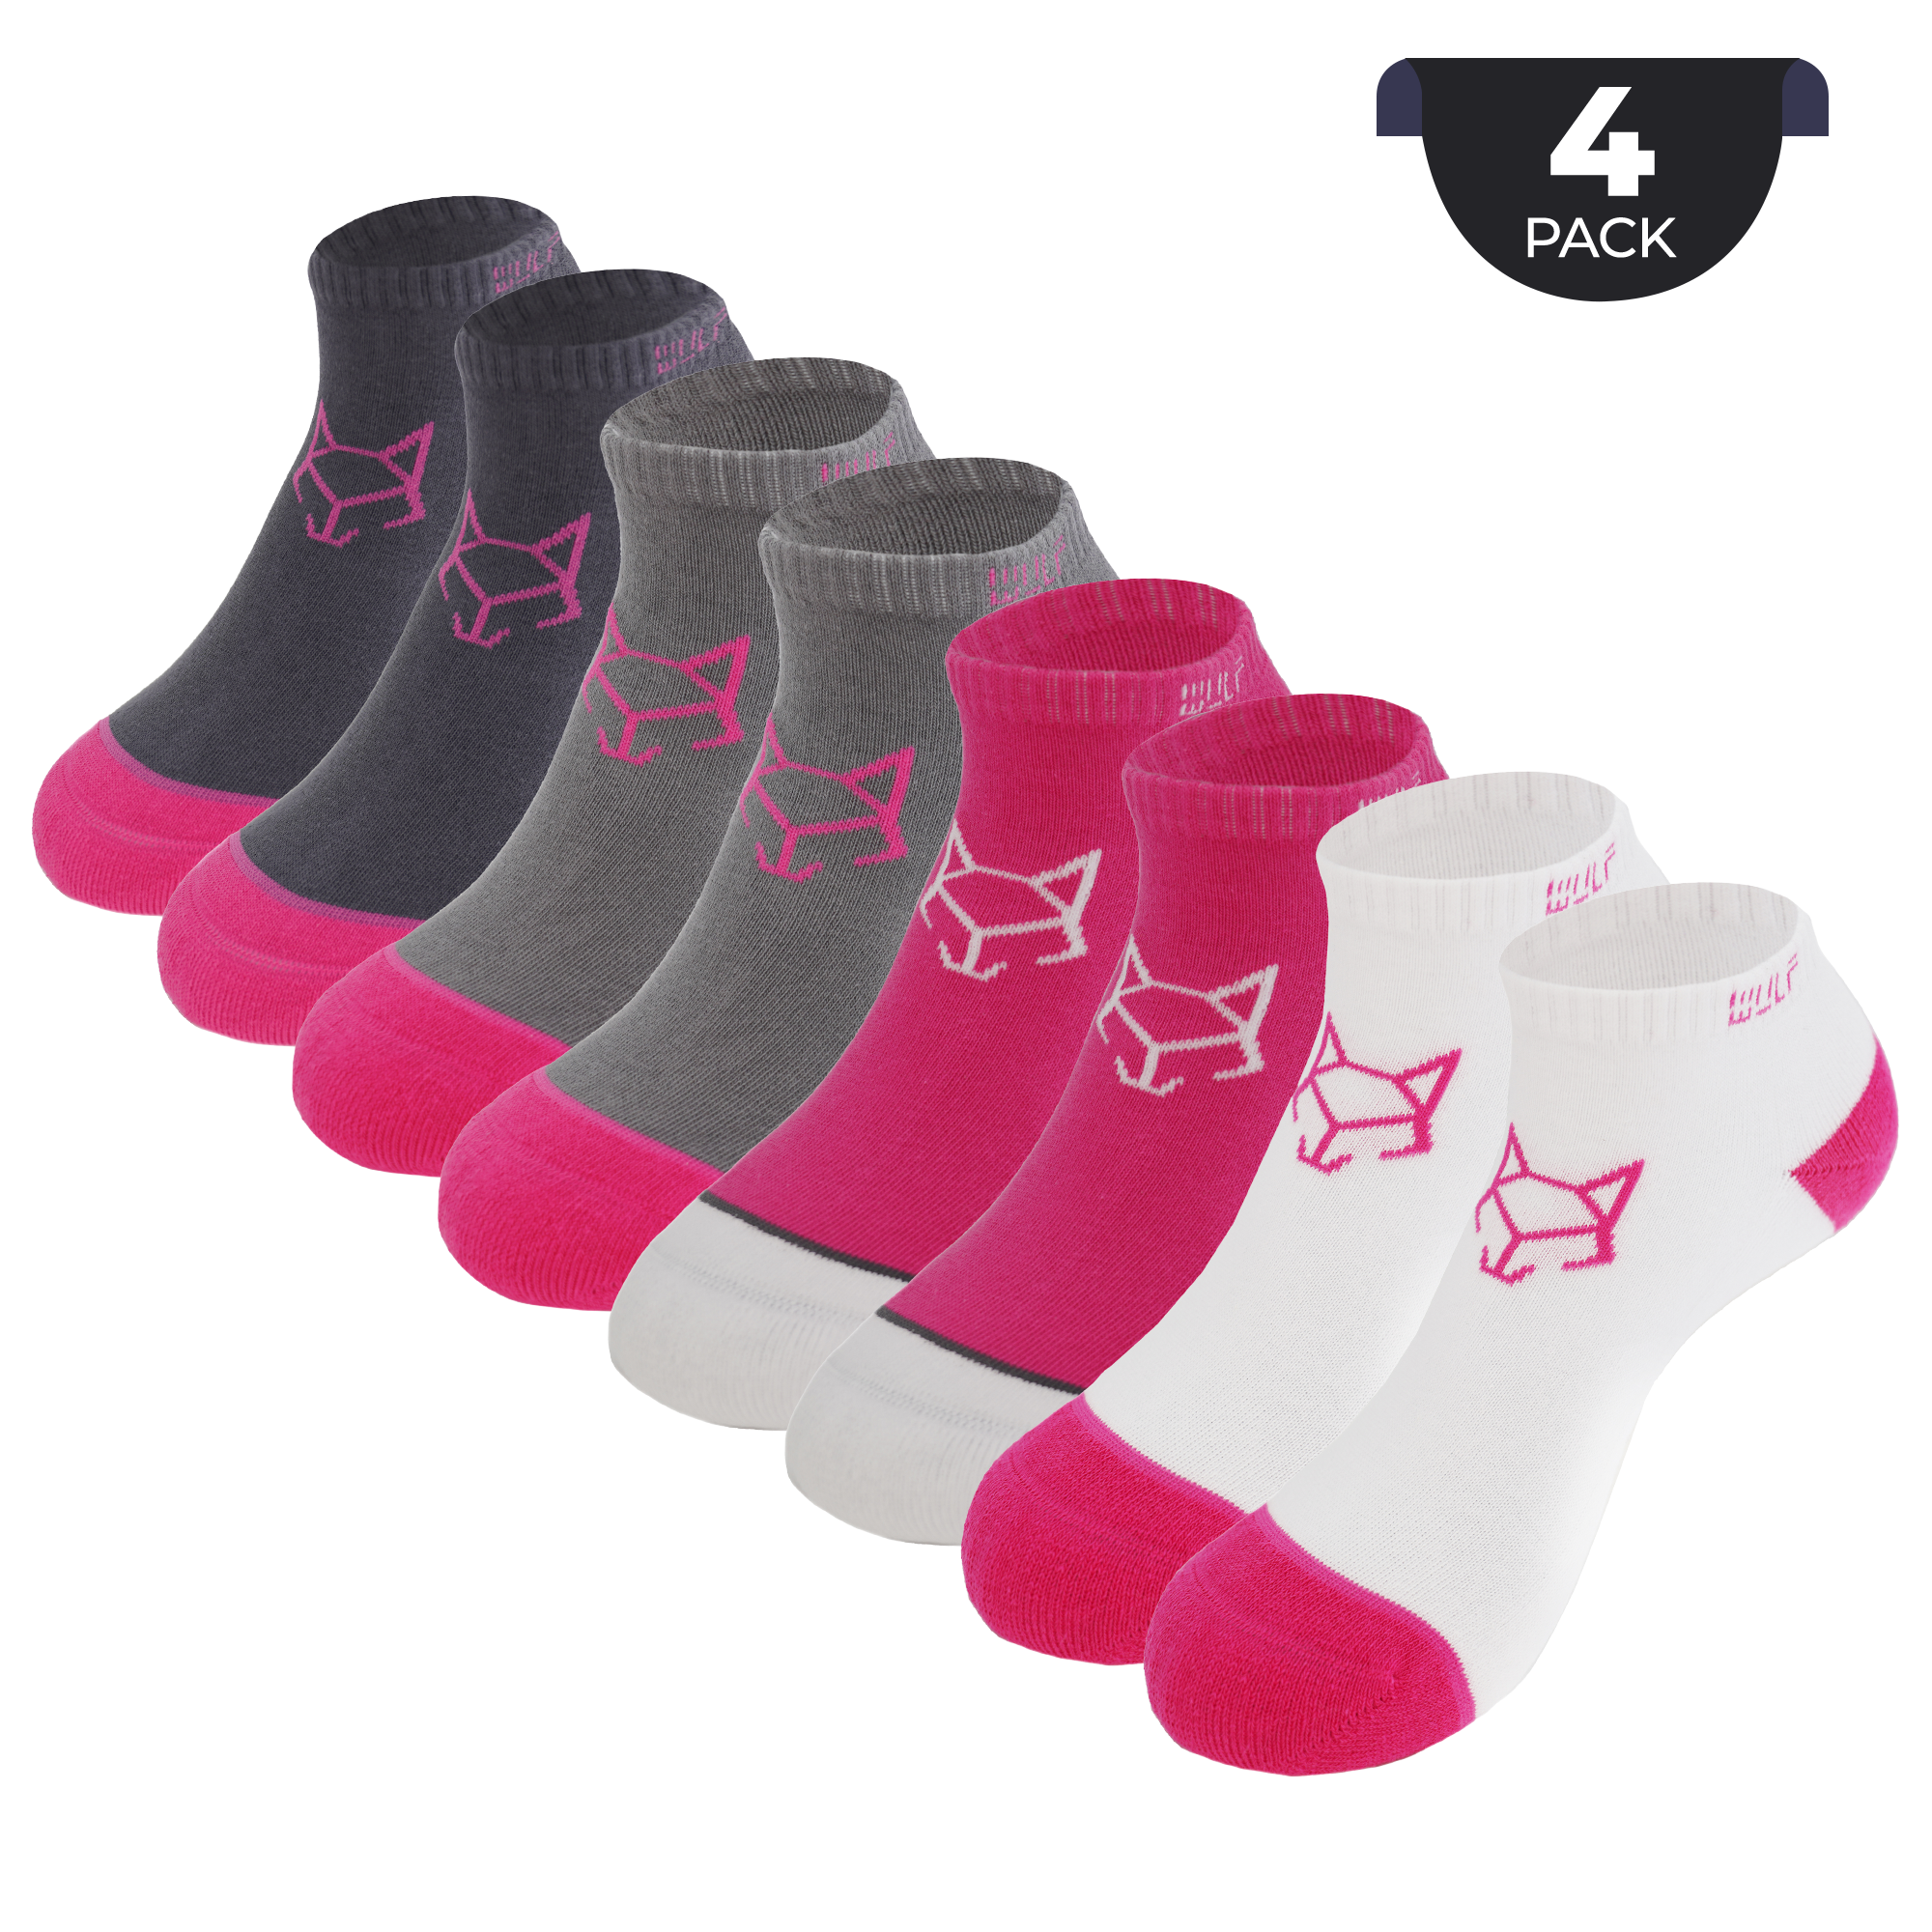 Classic Women's Ankle Socks - Multi Color pack of 4